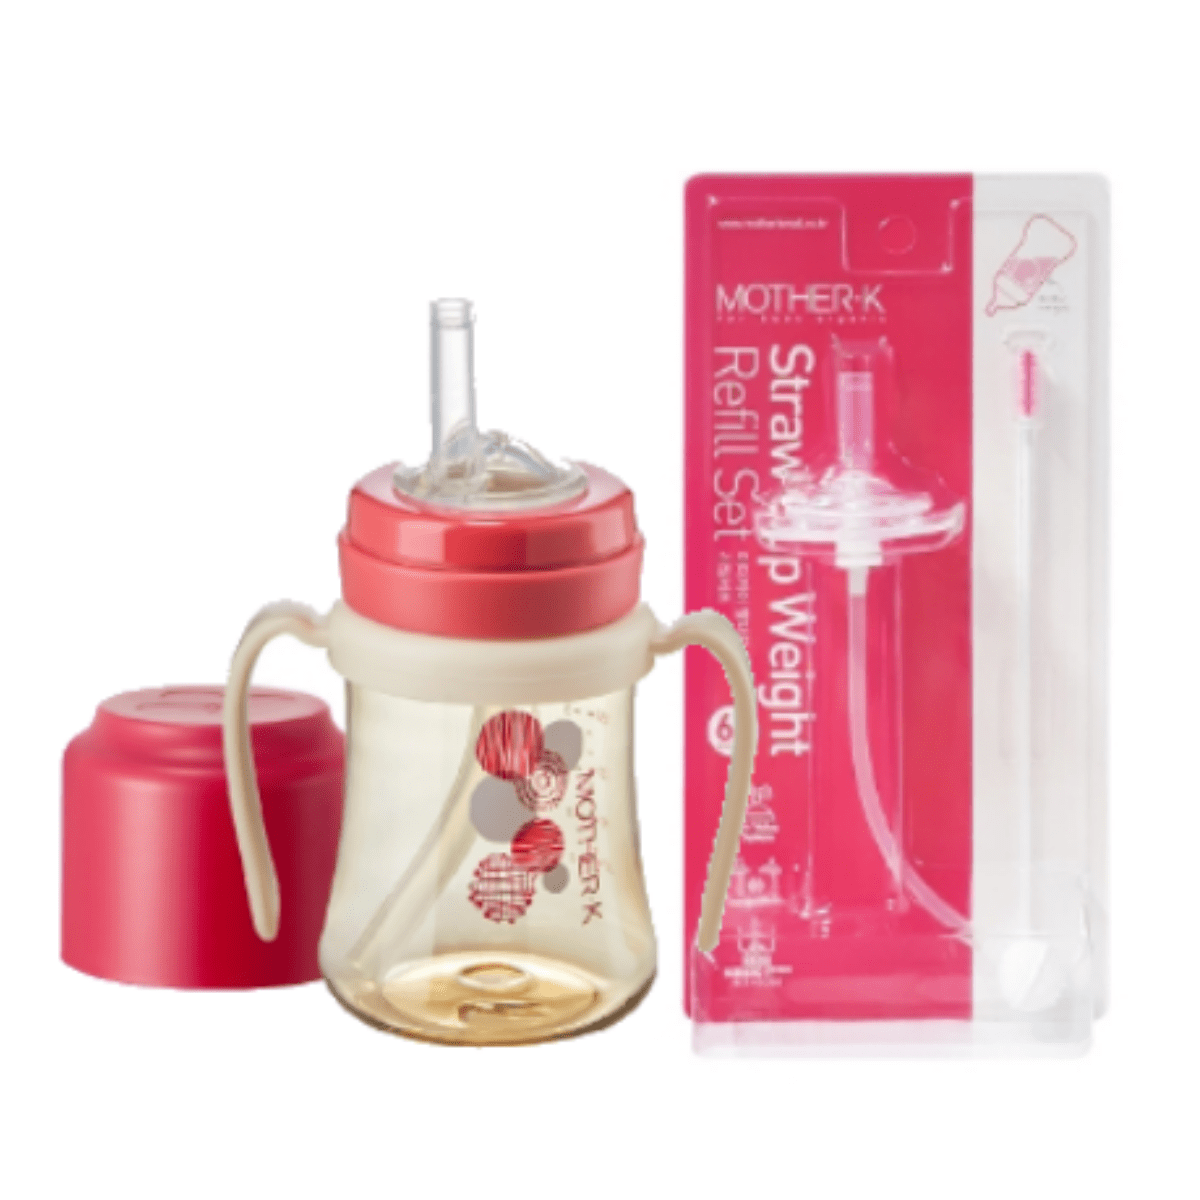 Mother-K PPSU Straw Bottle 200mL (Red) & Weight Refill Set (with brush)